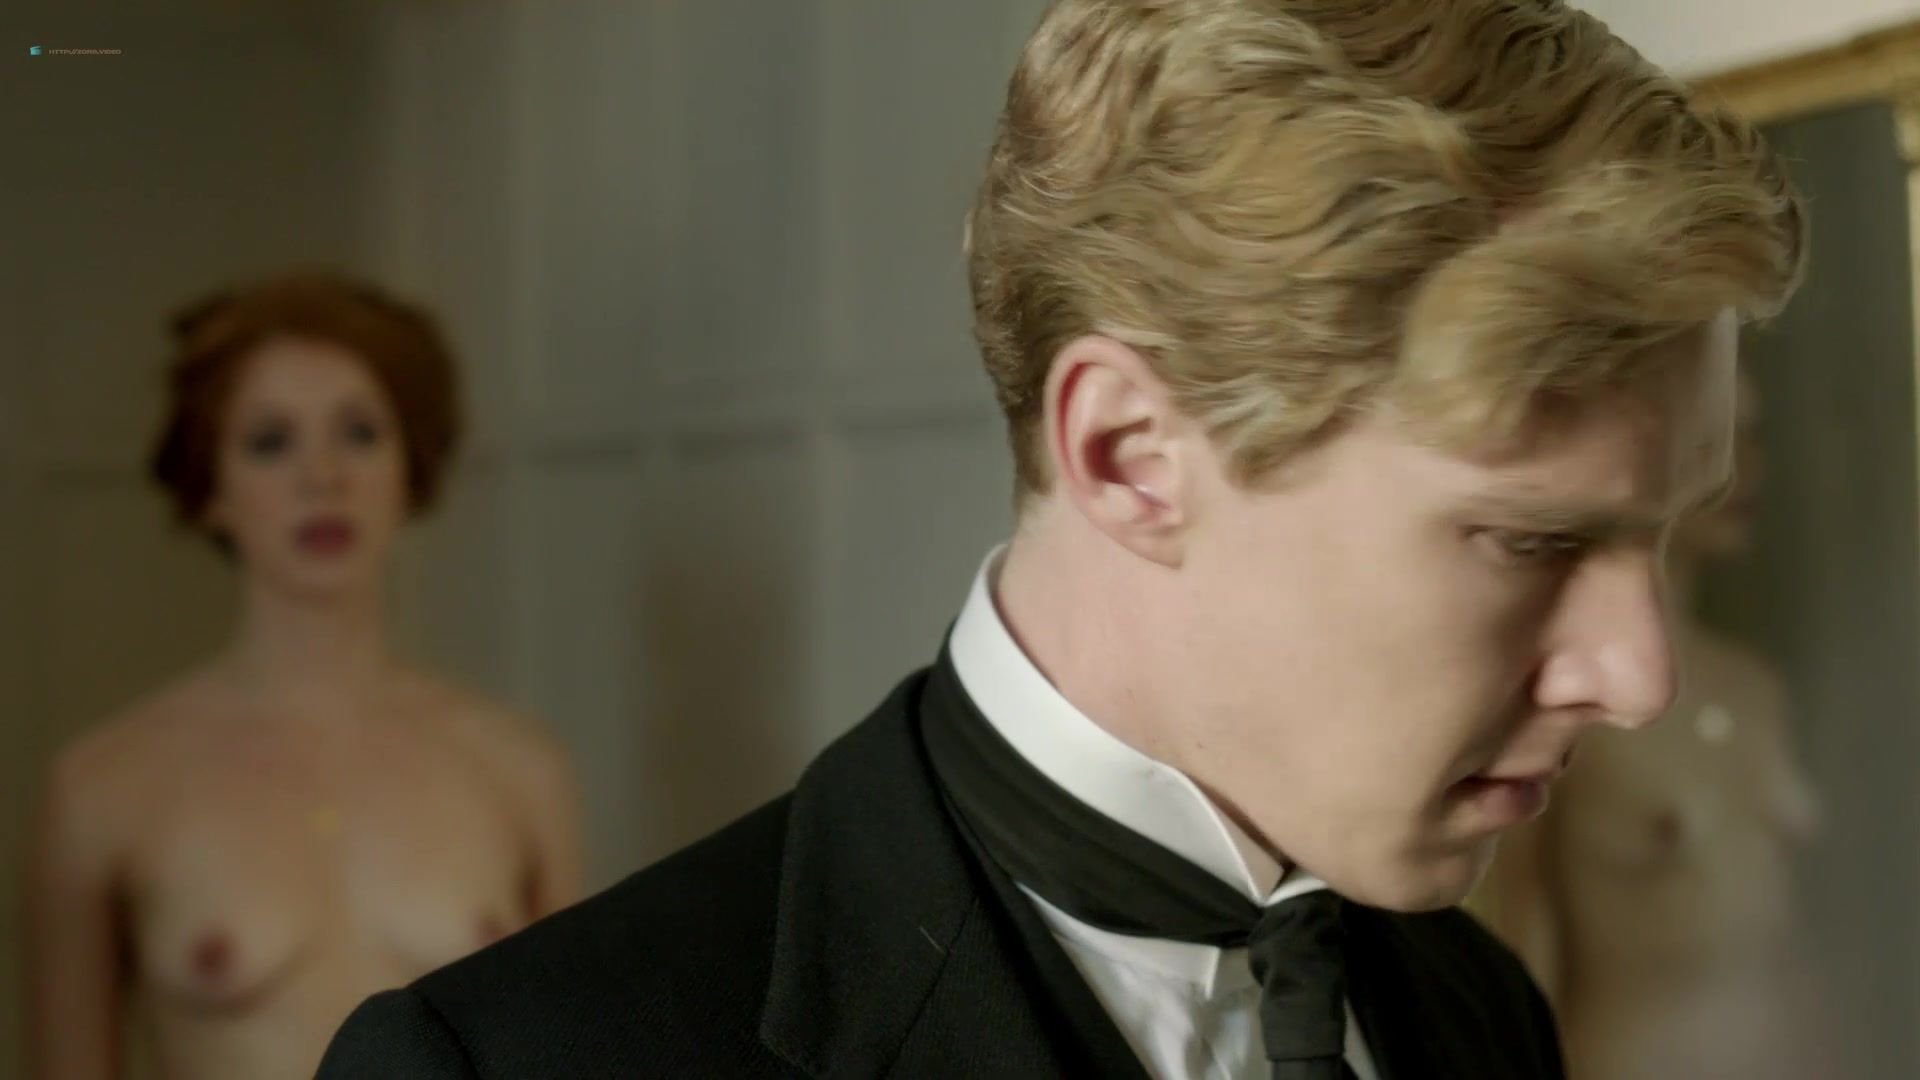 Game Rebecca Hall, Adelaide Clemens naked - Parades End (2012) JuliaMovies